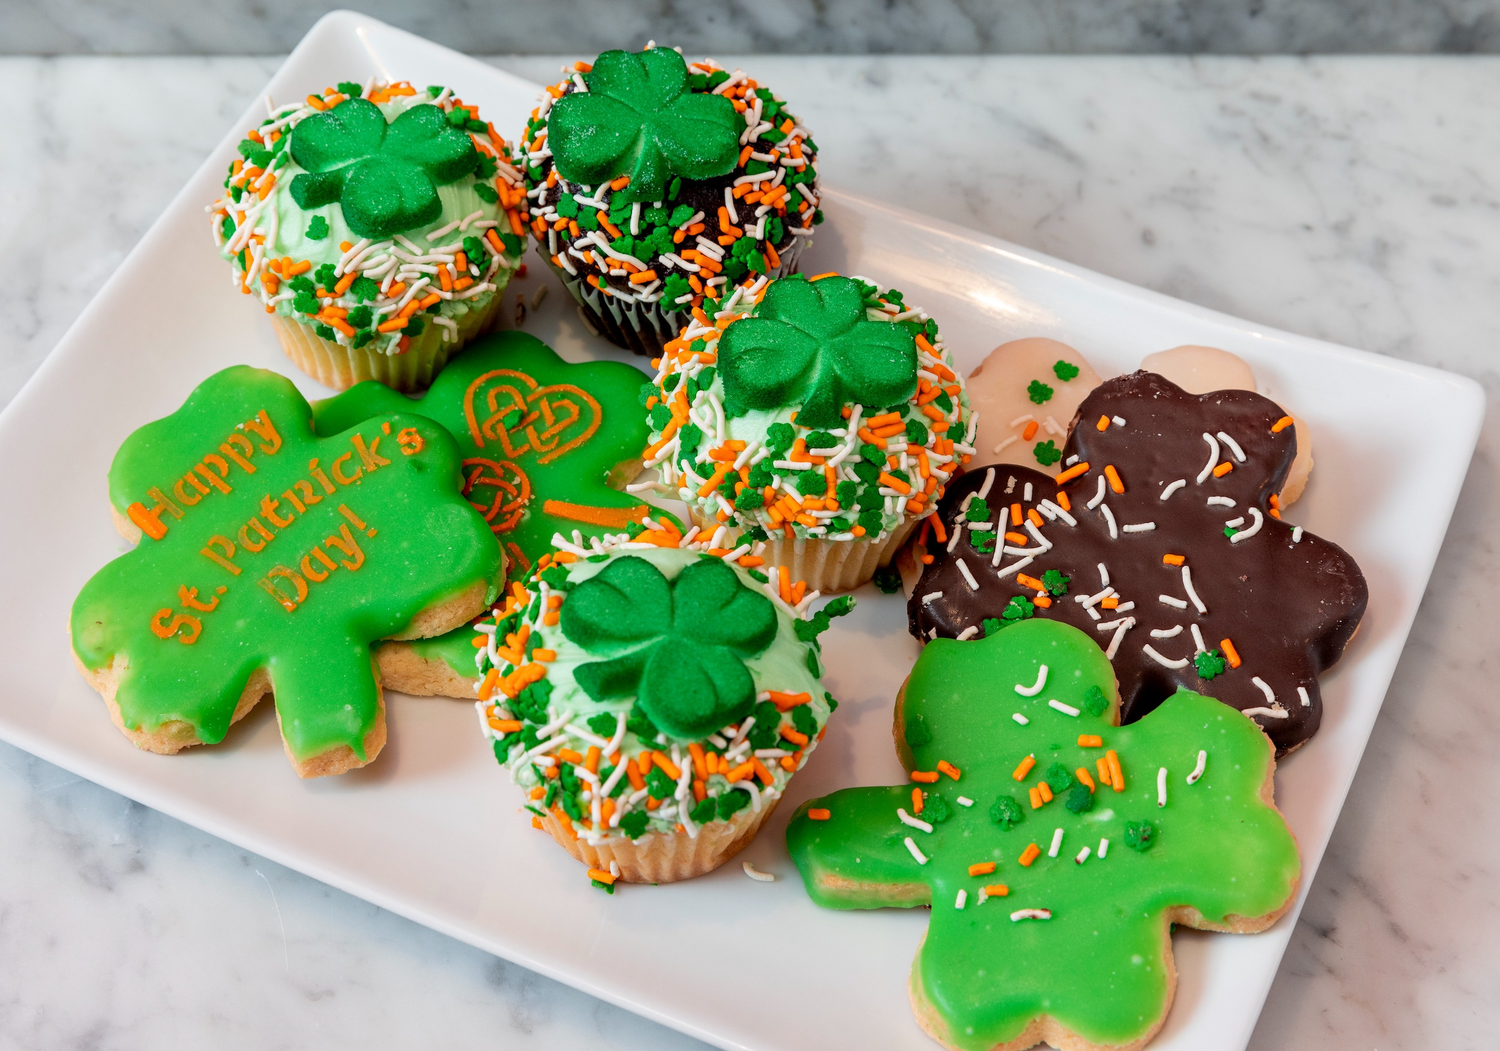 Try of St. Patrick's Day cupcakes and cookies from William Greenberg Dessers